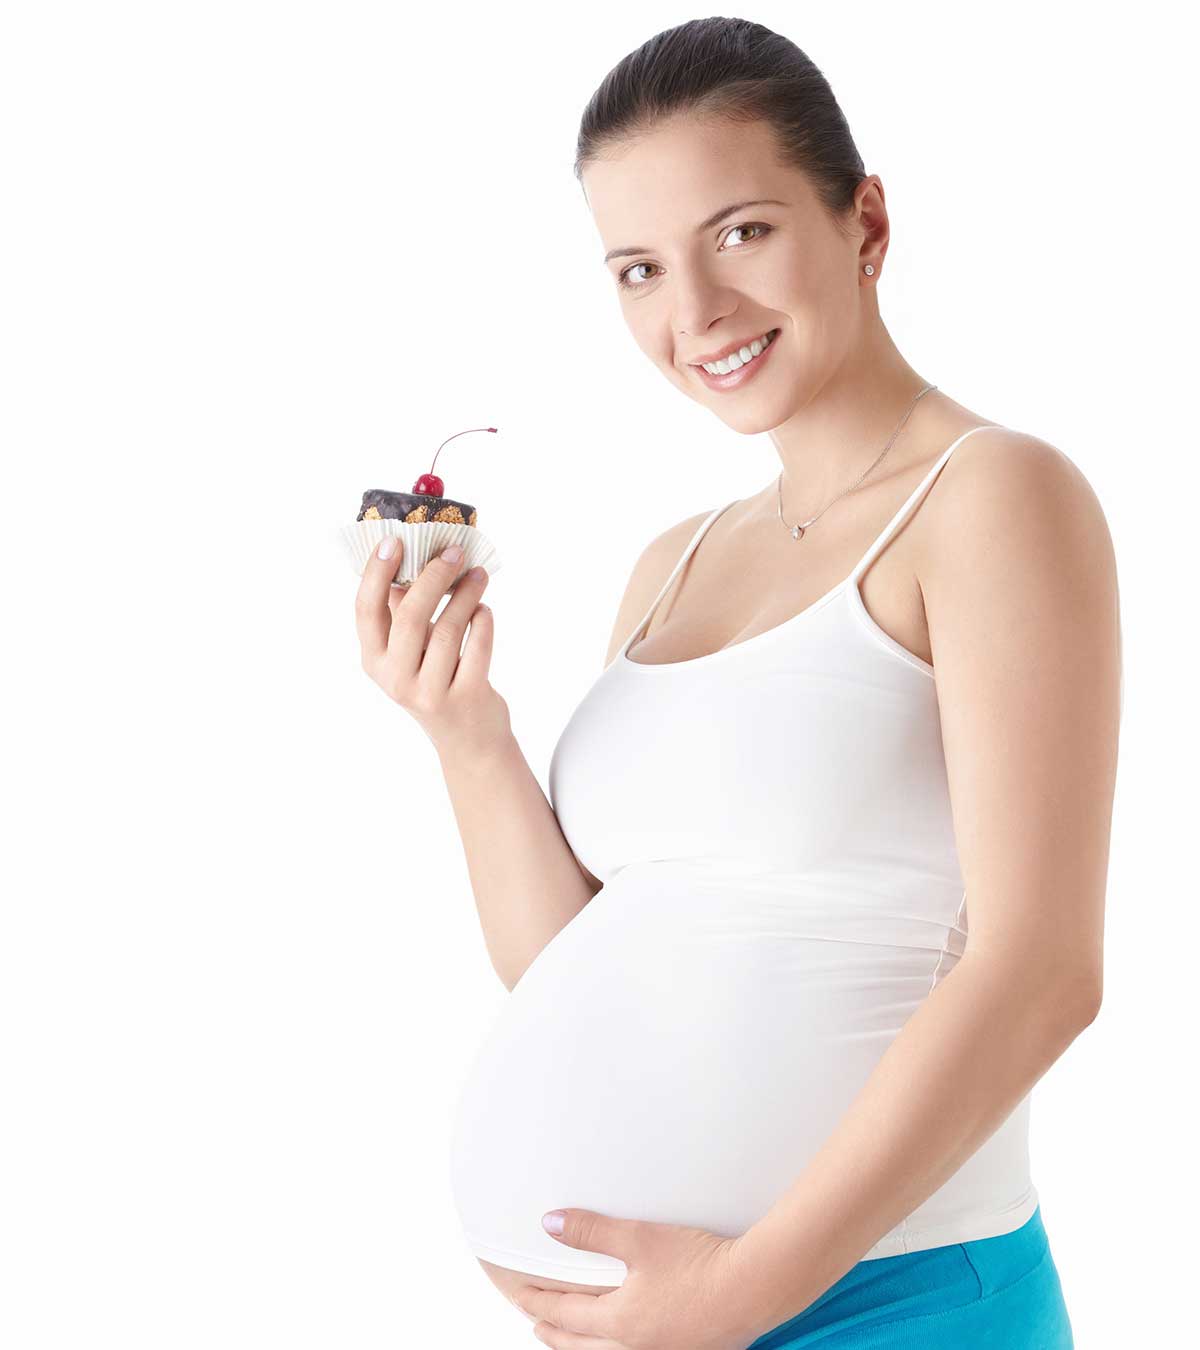 Is It Safe To Use Baking Soda During Pregnancy?